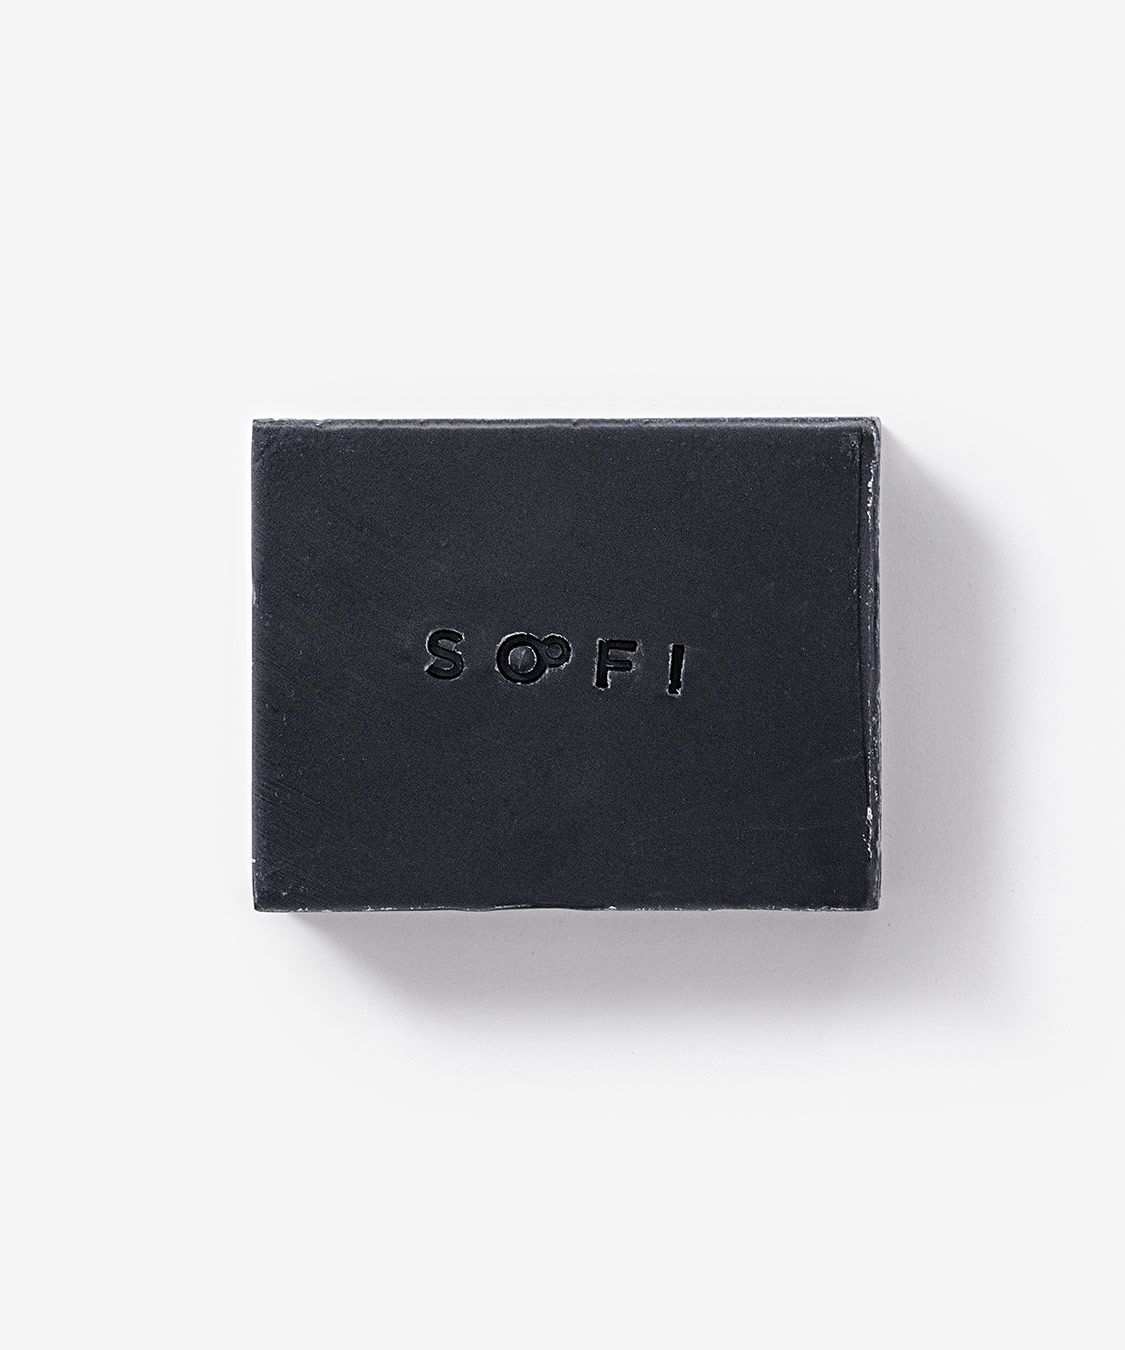 Body soap bar — charcoal + clay